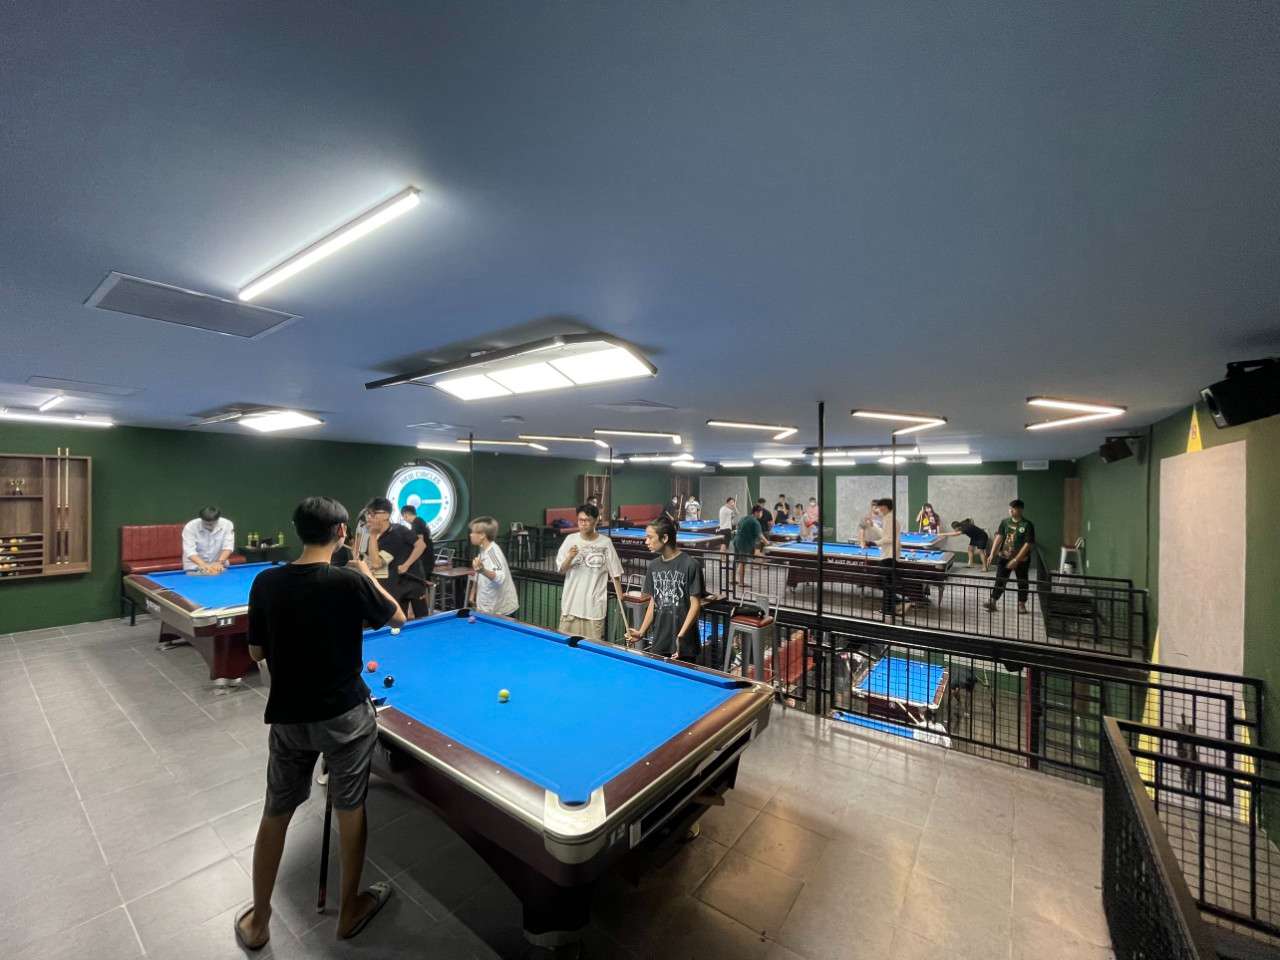 A group of people playing pool

Description automatically generated with medium confidence